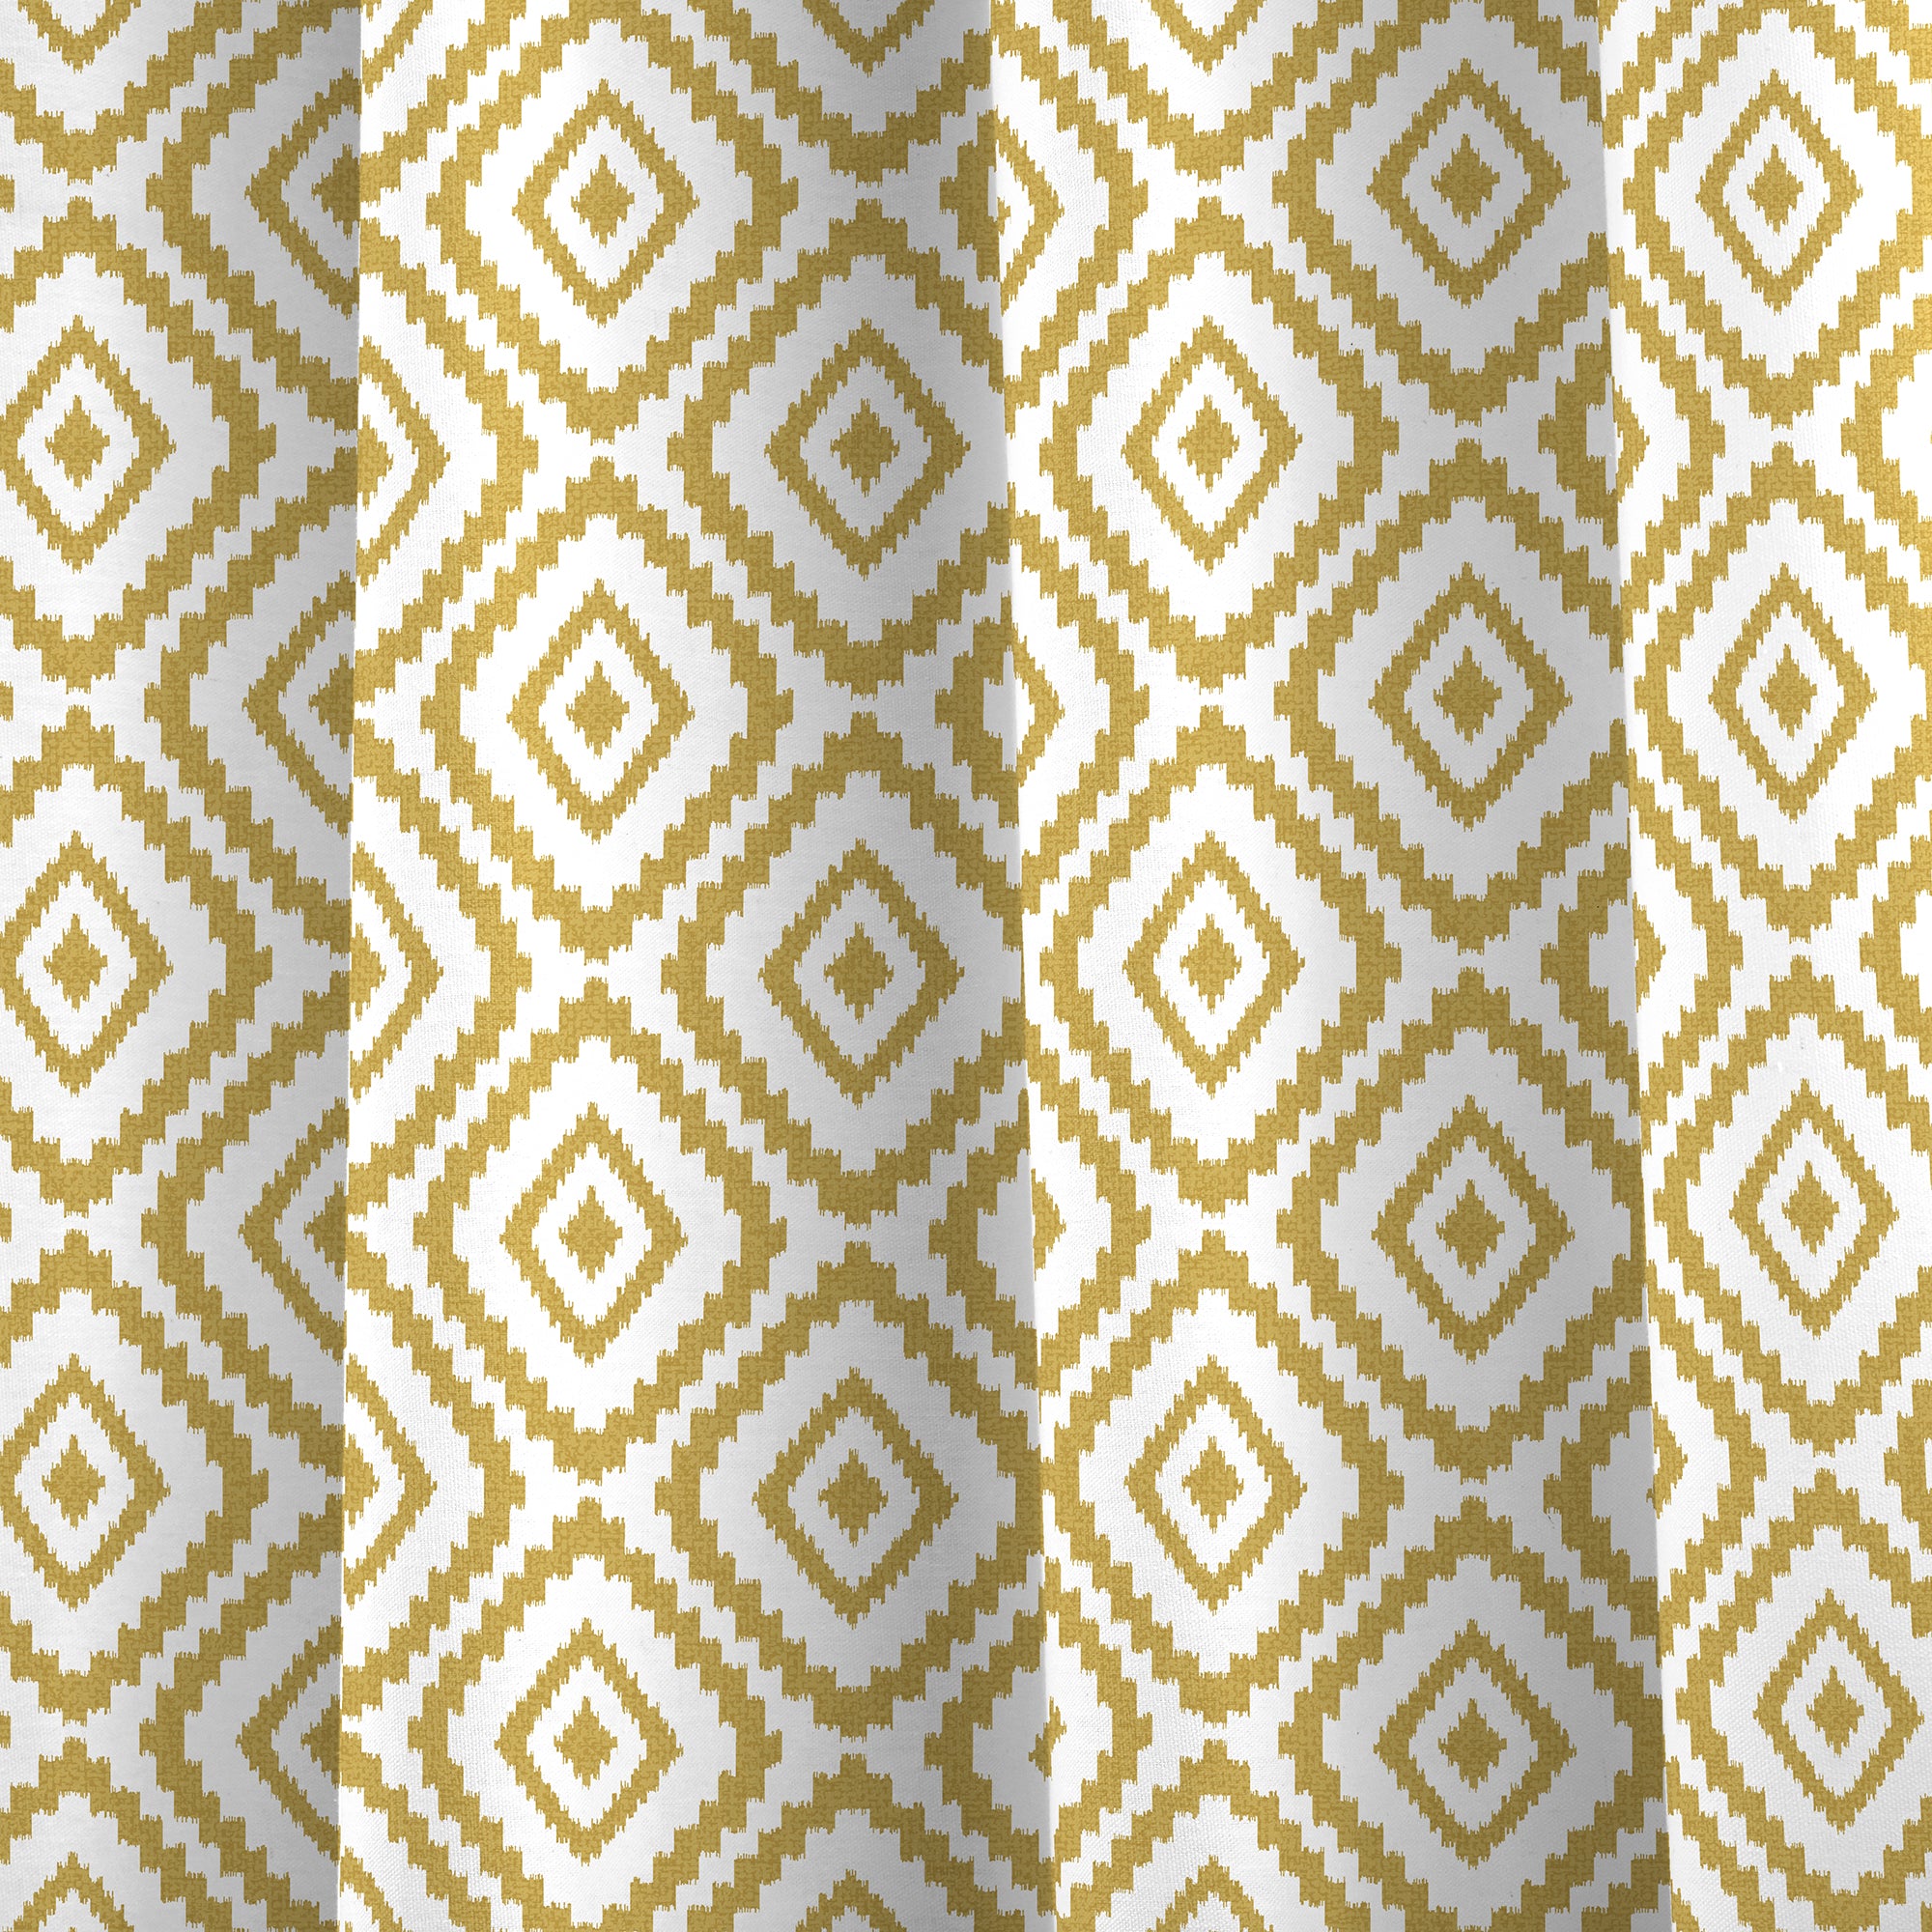 Navaho - 100% Cotton Pair of Eyelet Curtains in Ochre - by Fusion